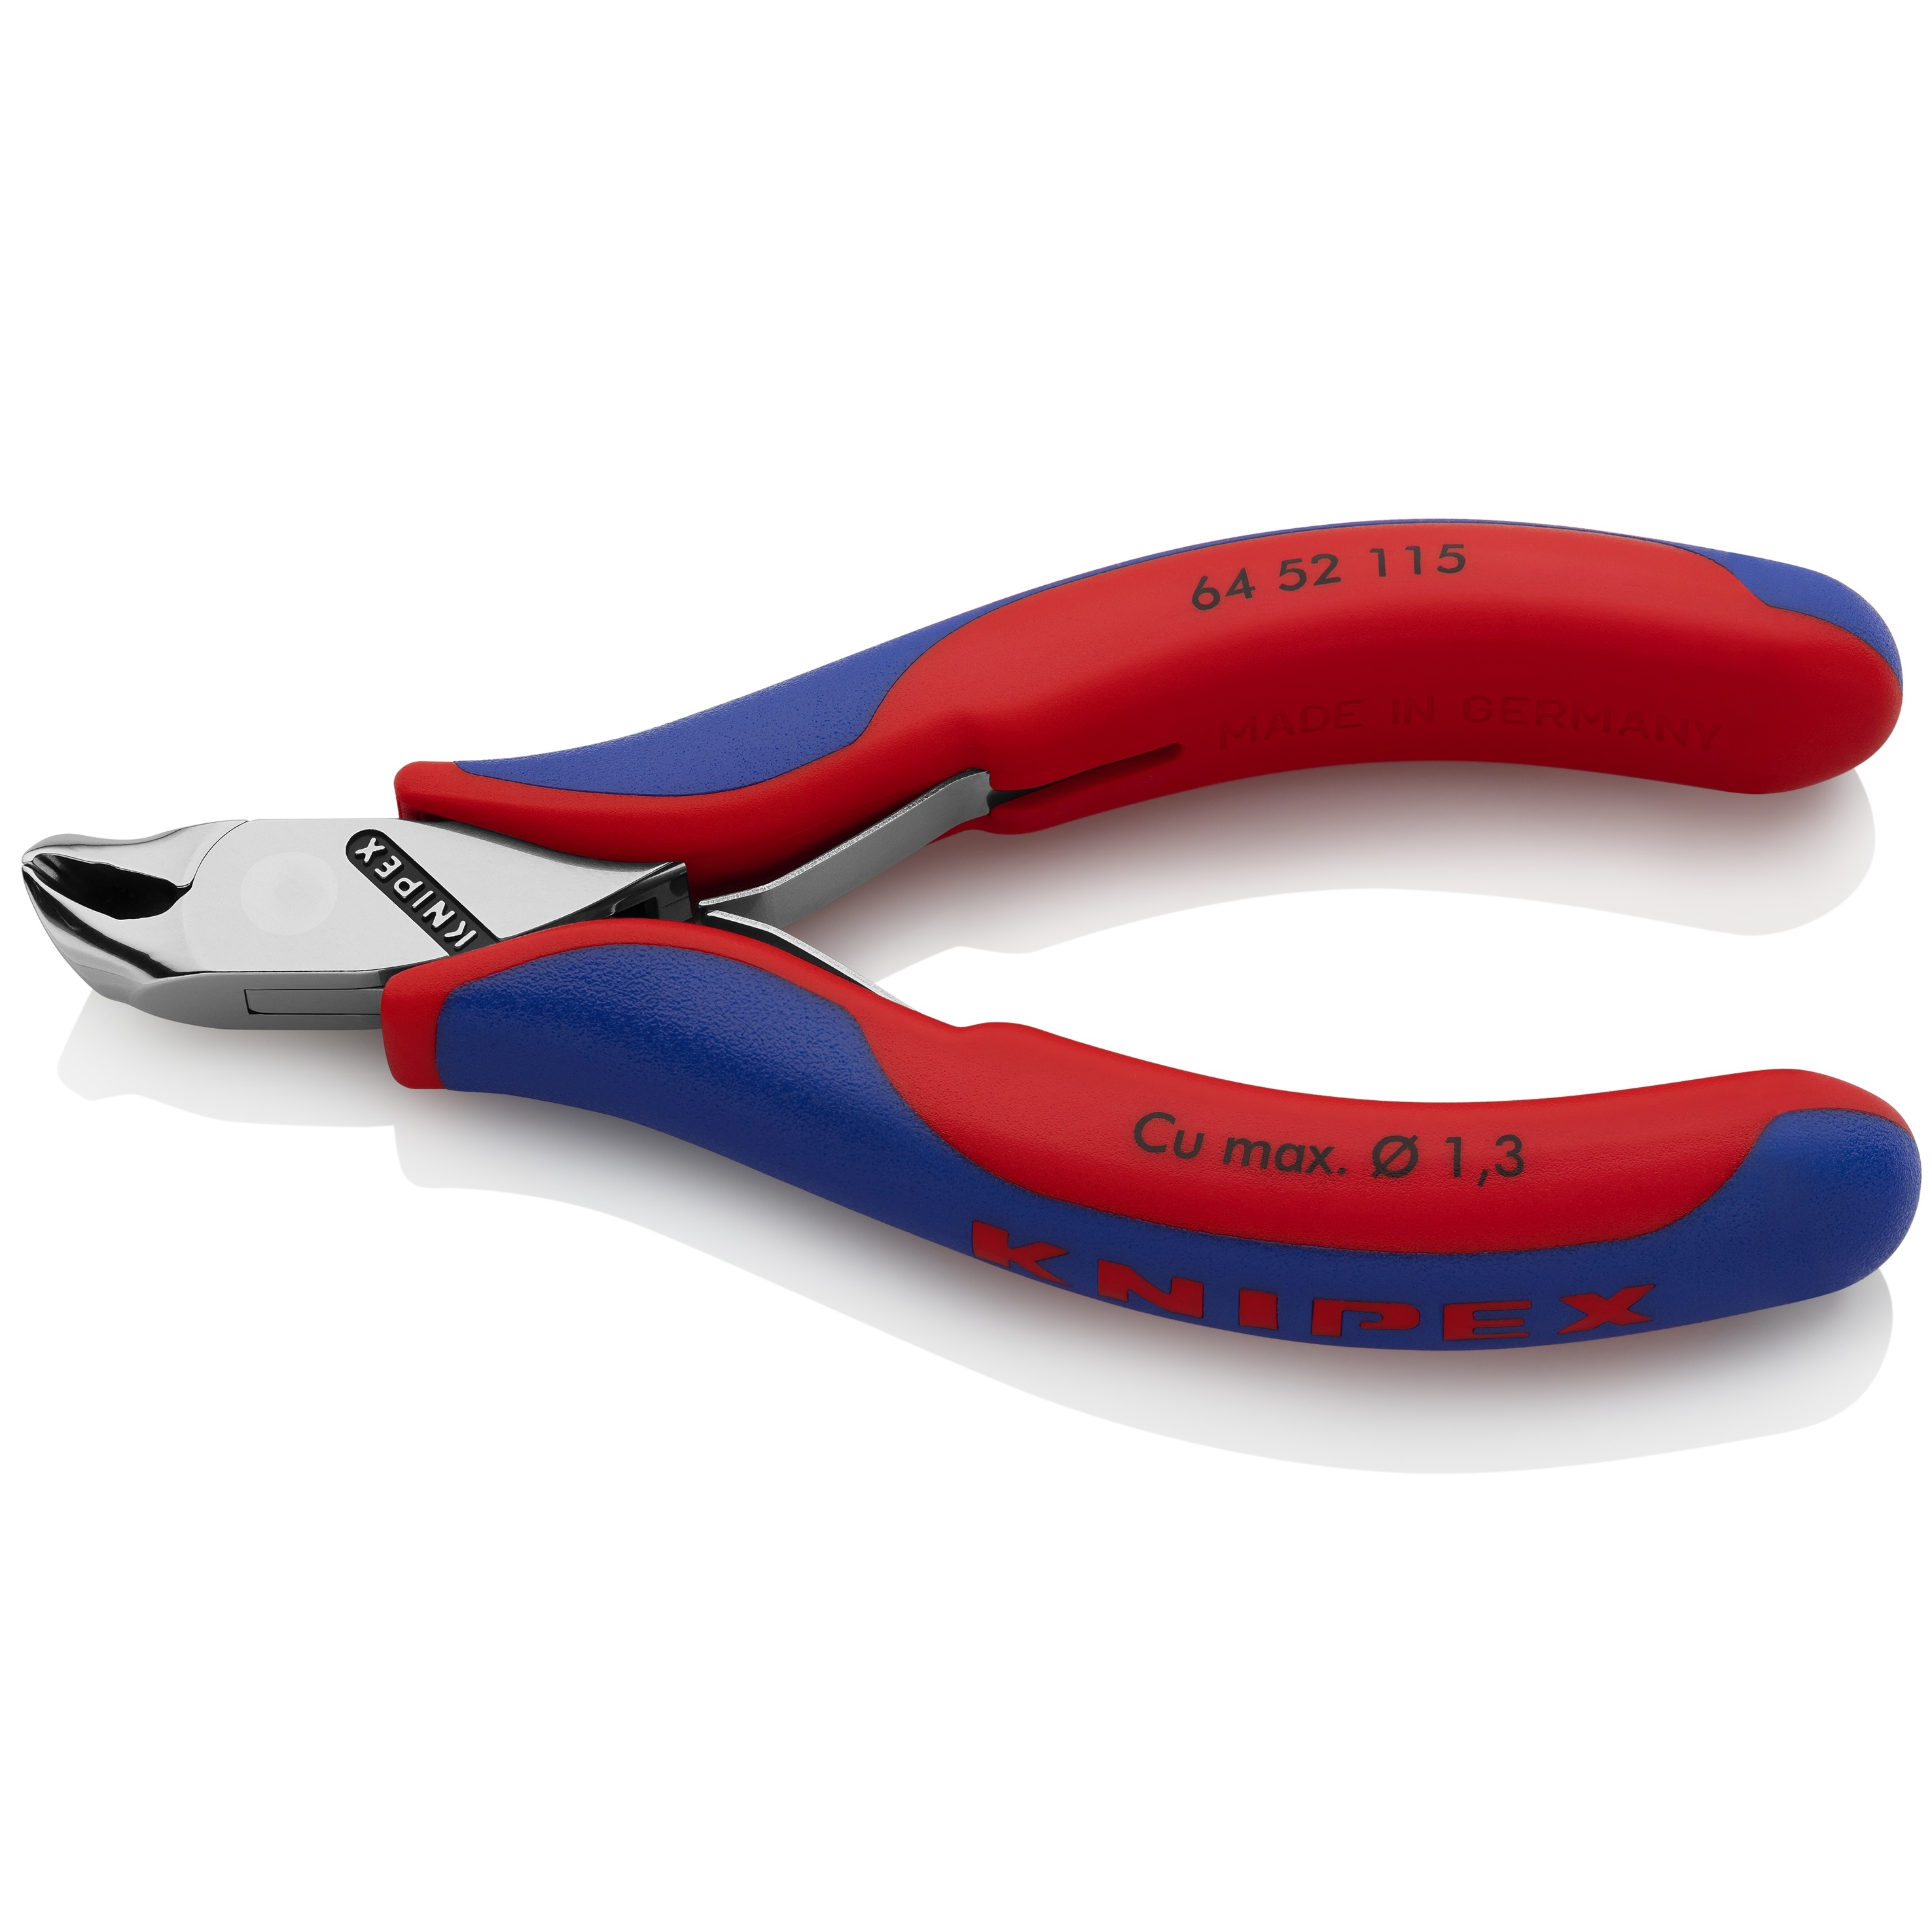 64 52 115 Knipex 4.5 inch Full Flush Cutting ELECTRONICS END CUTTERS 